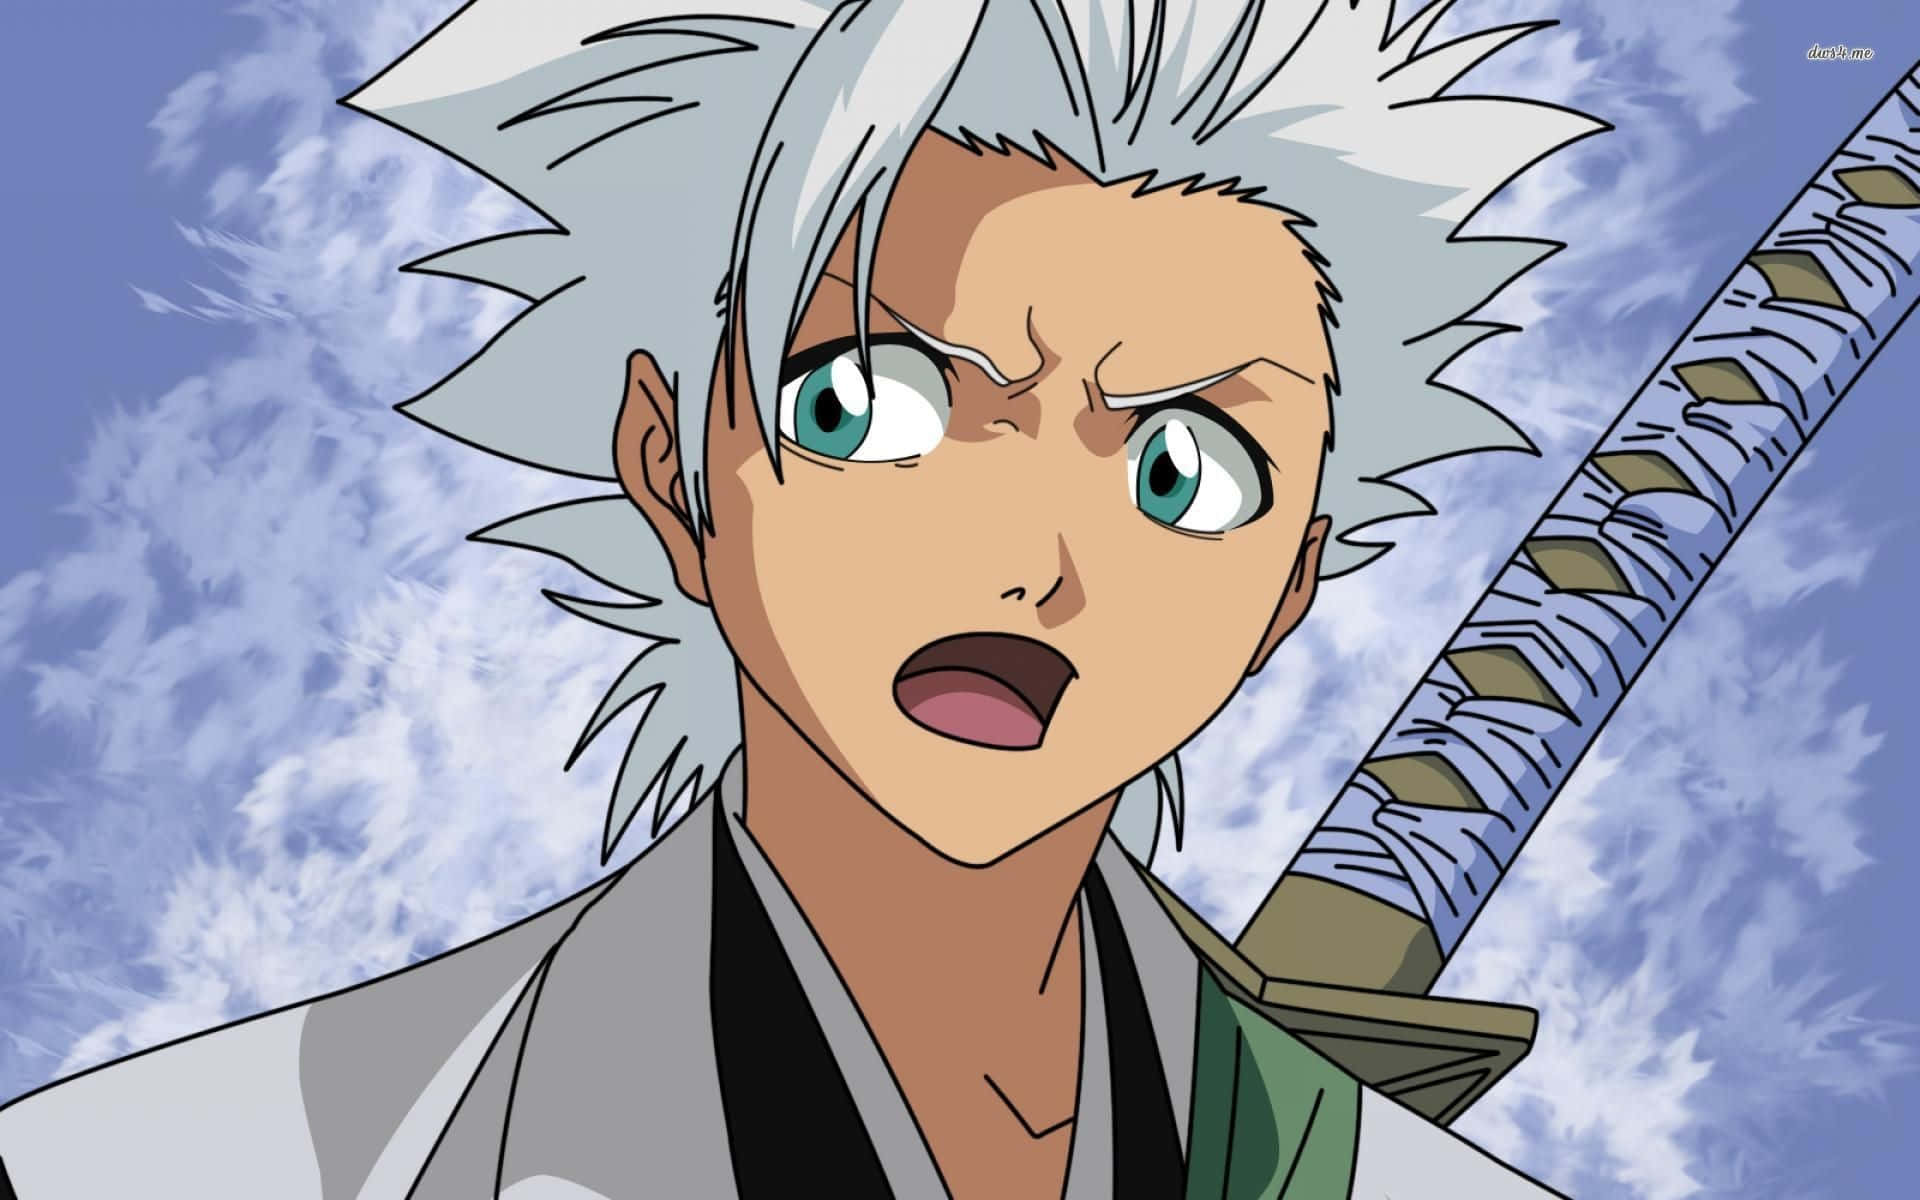 Toshiro Hitsugaya, Captain of the 10th Division of the Gotei 13. Wallpaper